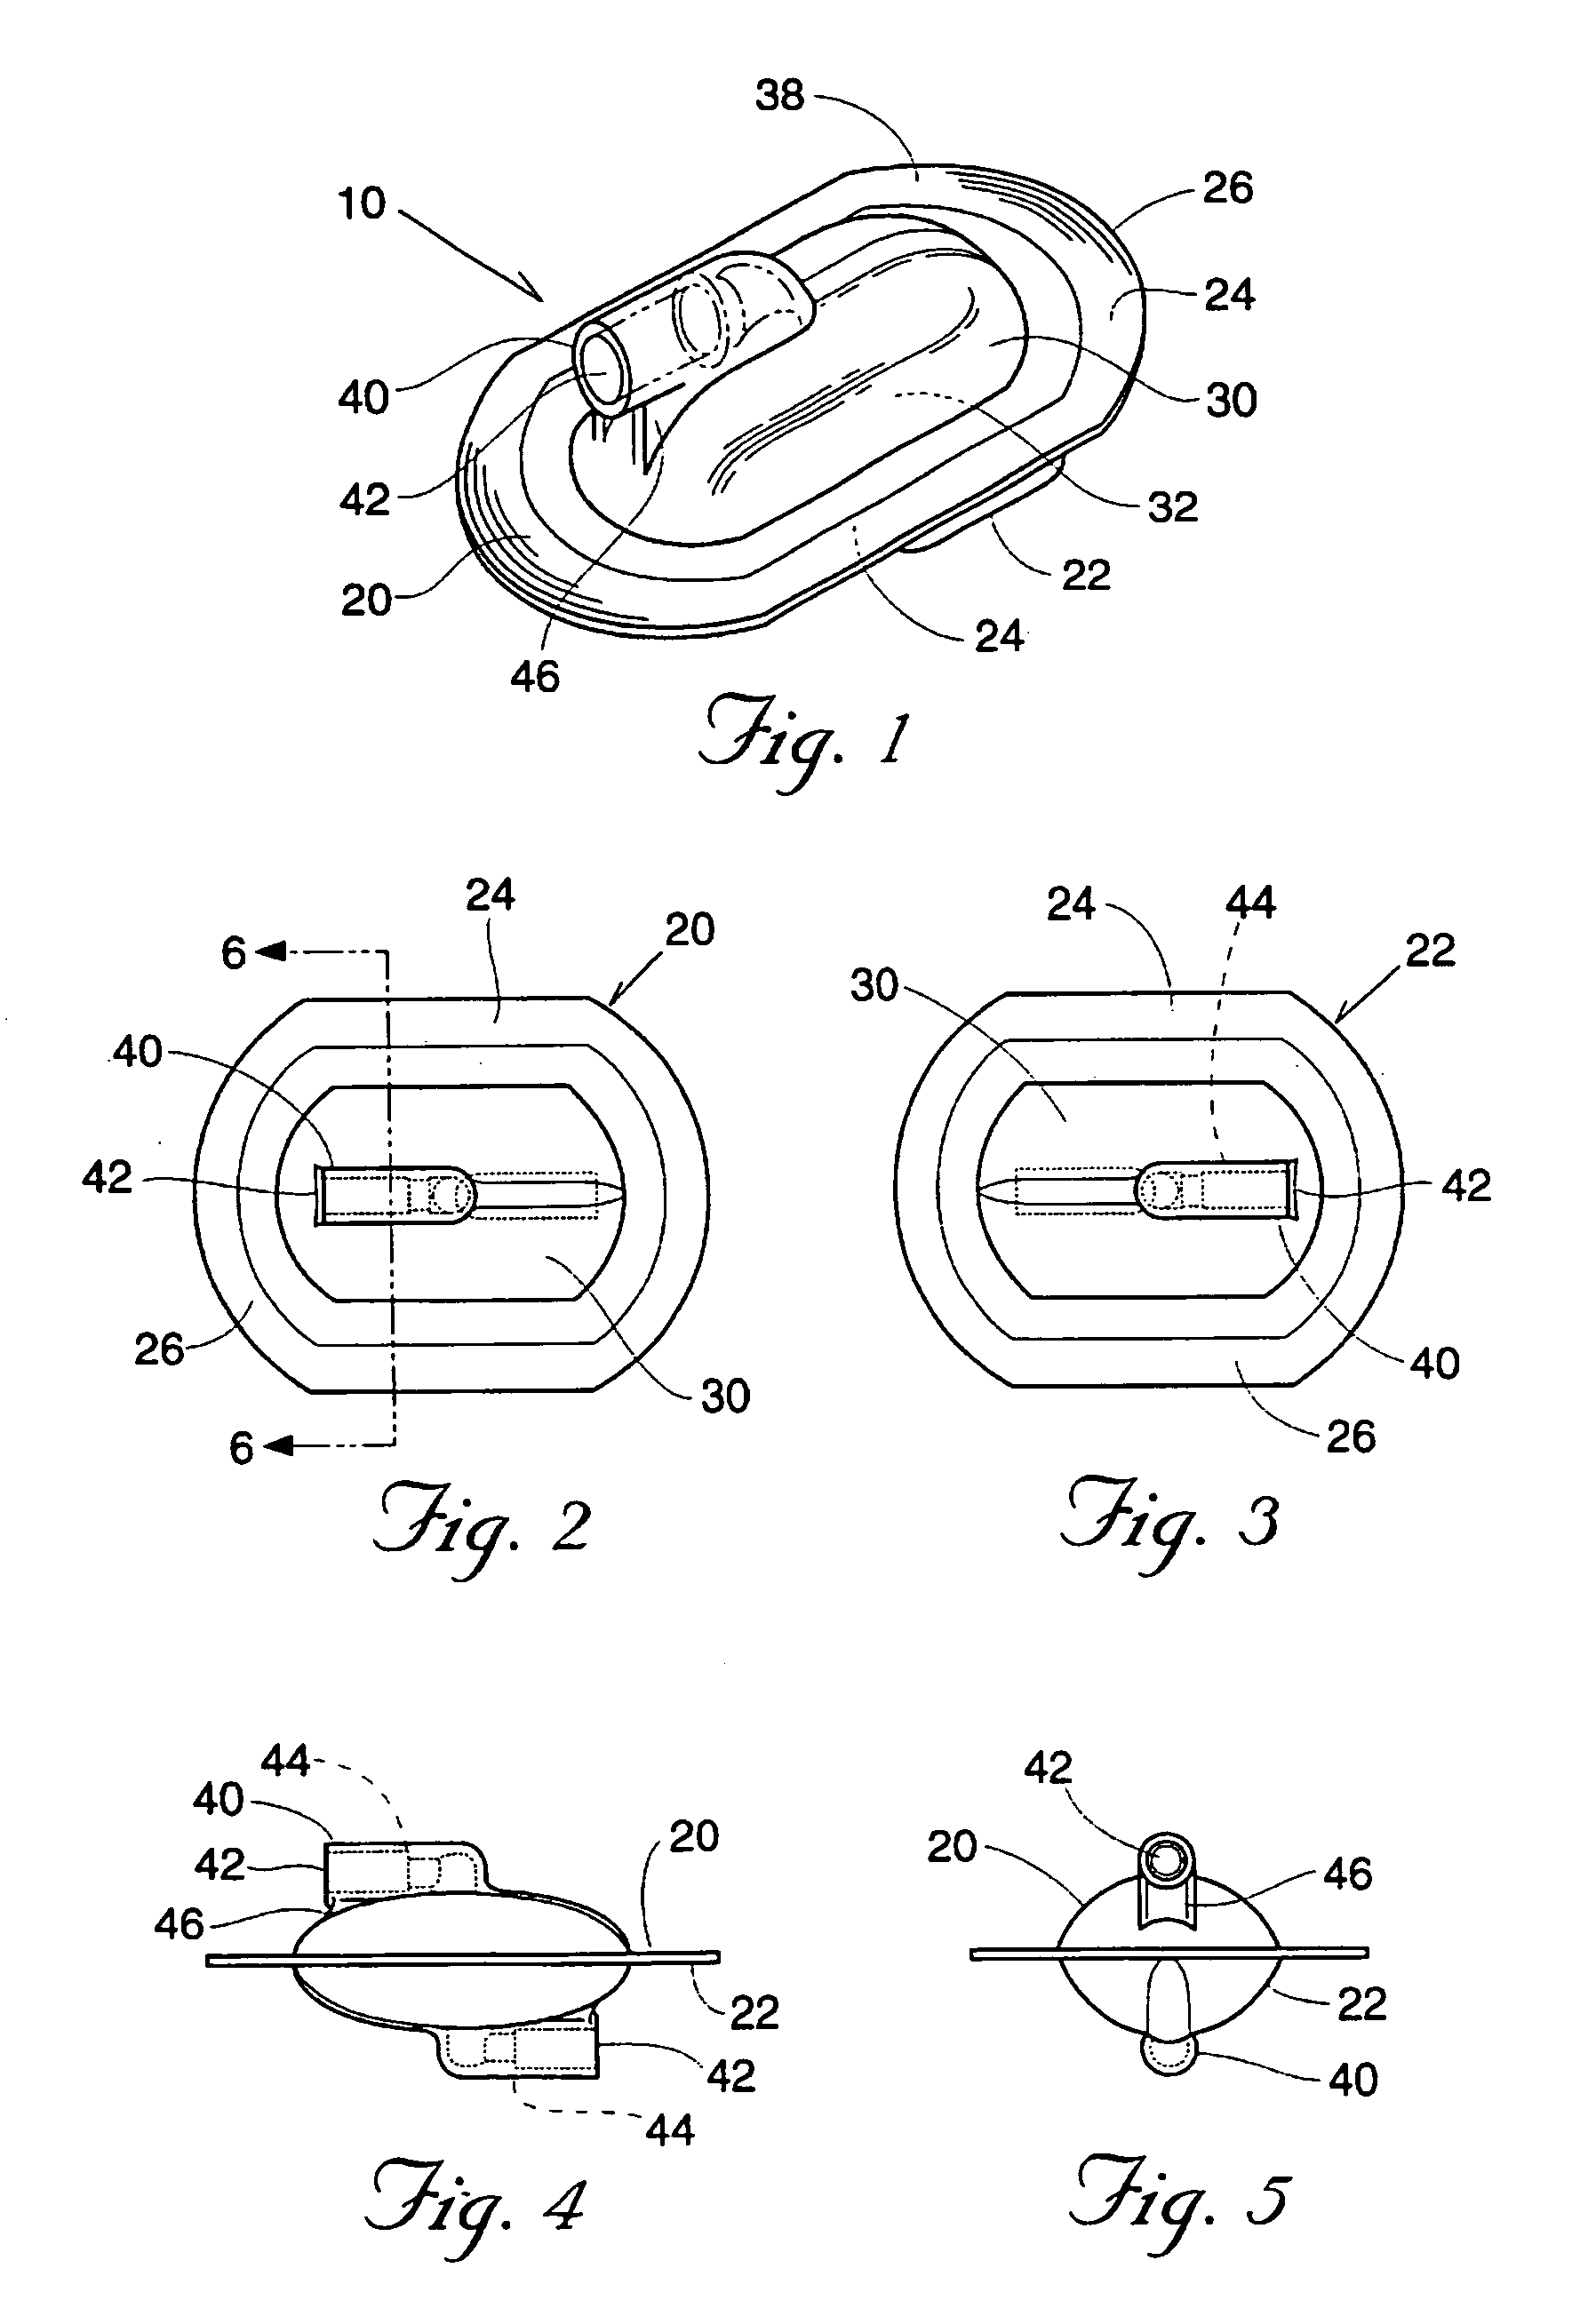 Method of making a filter assembly having a flexible housing